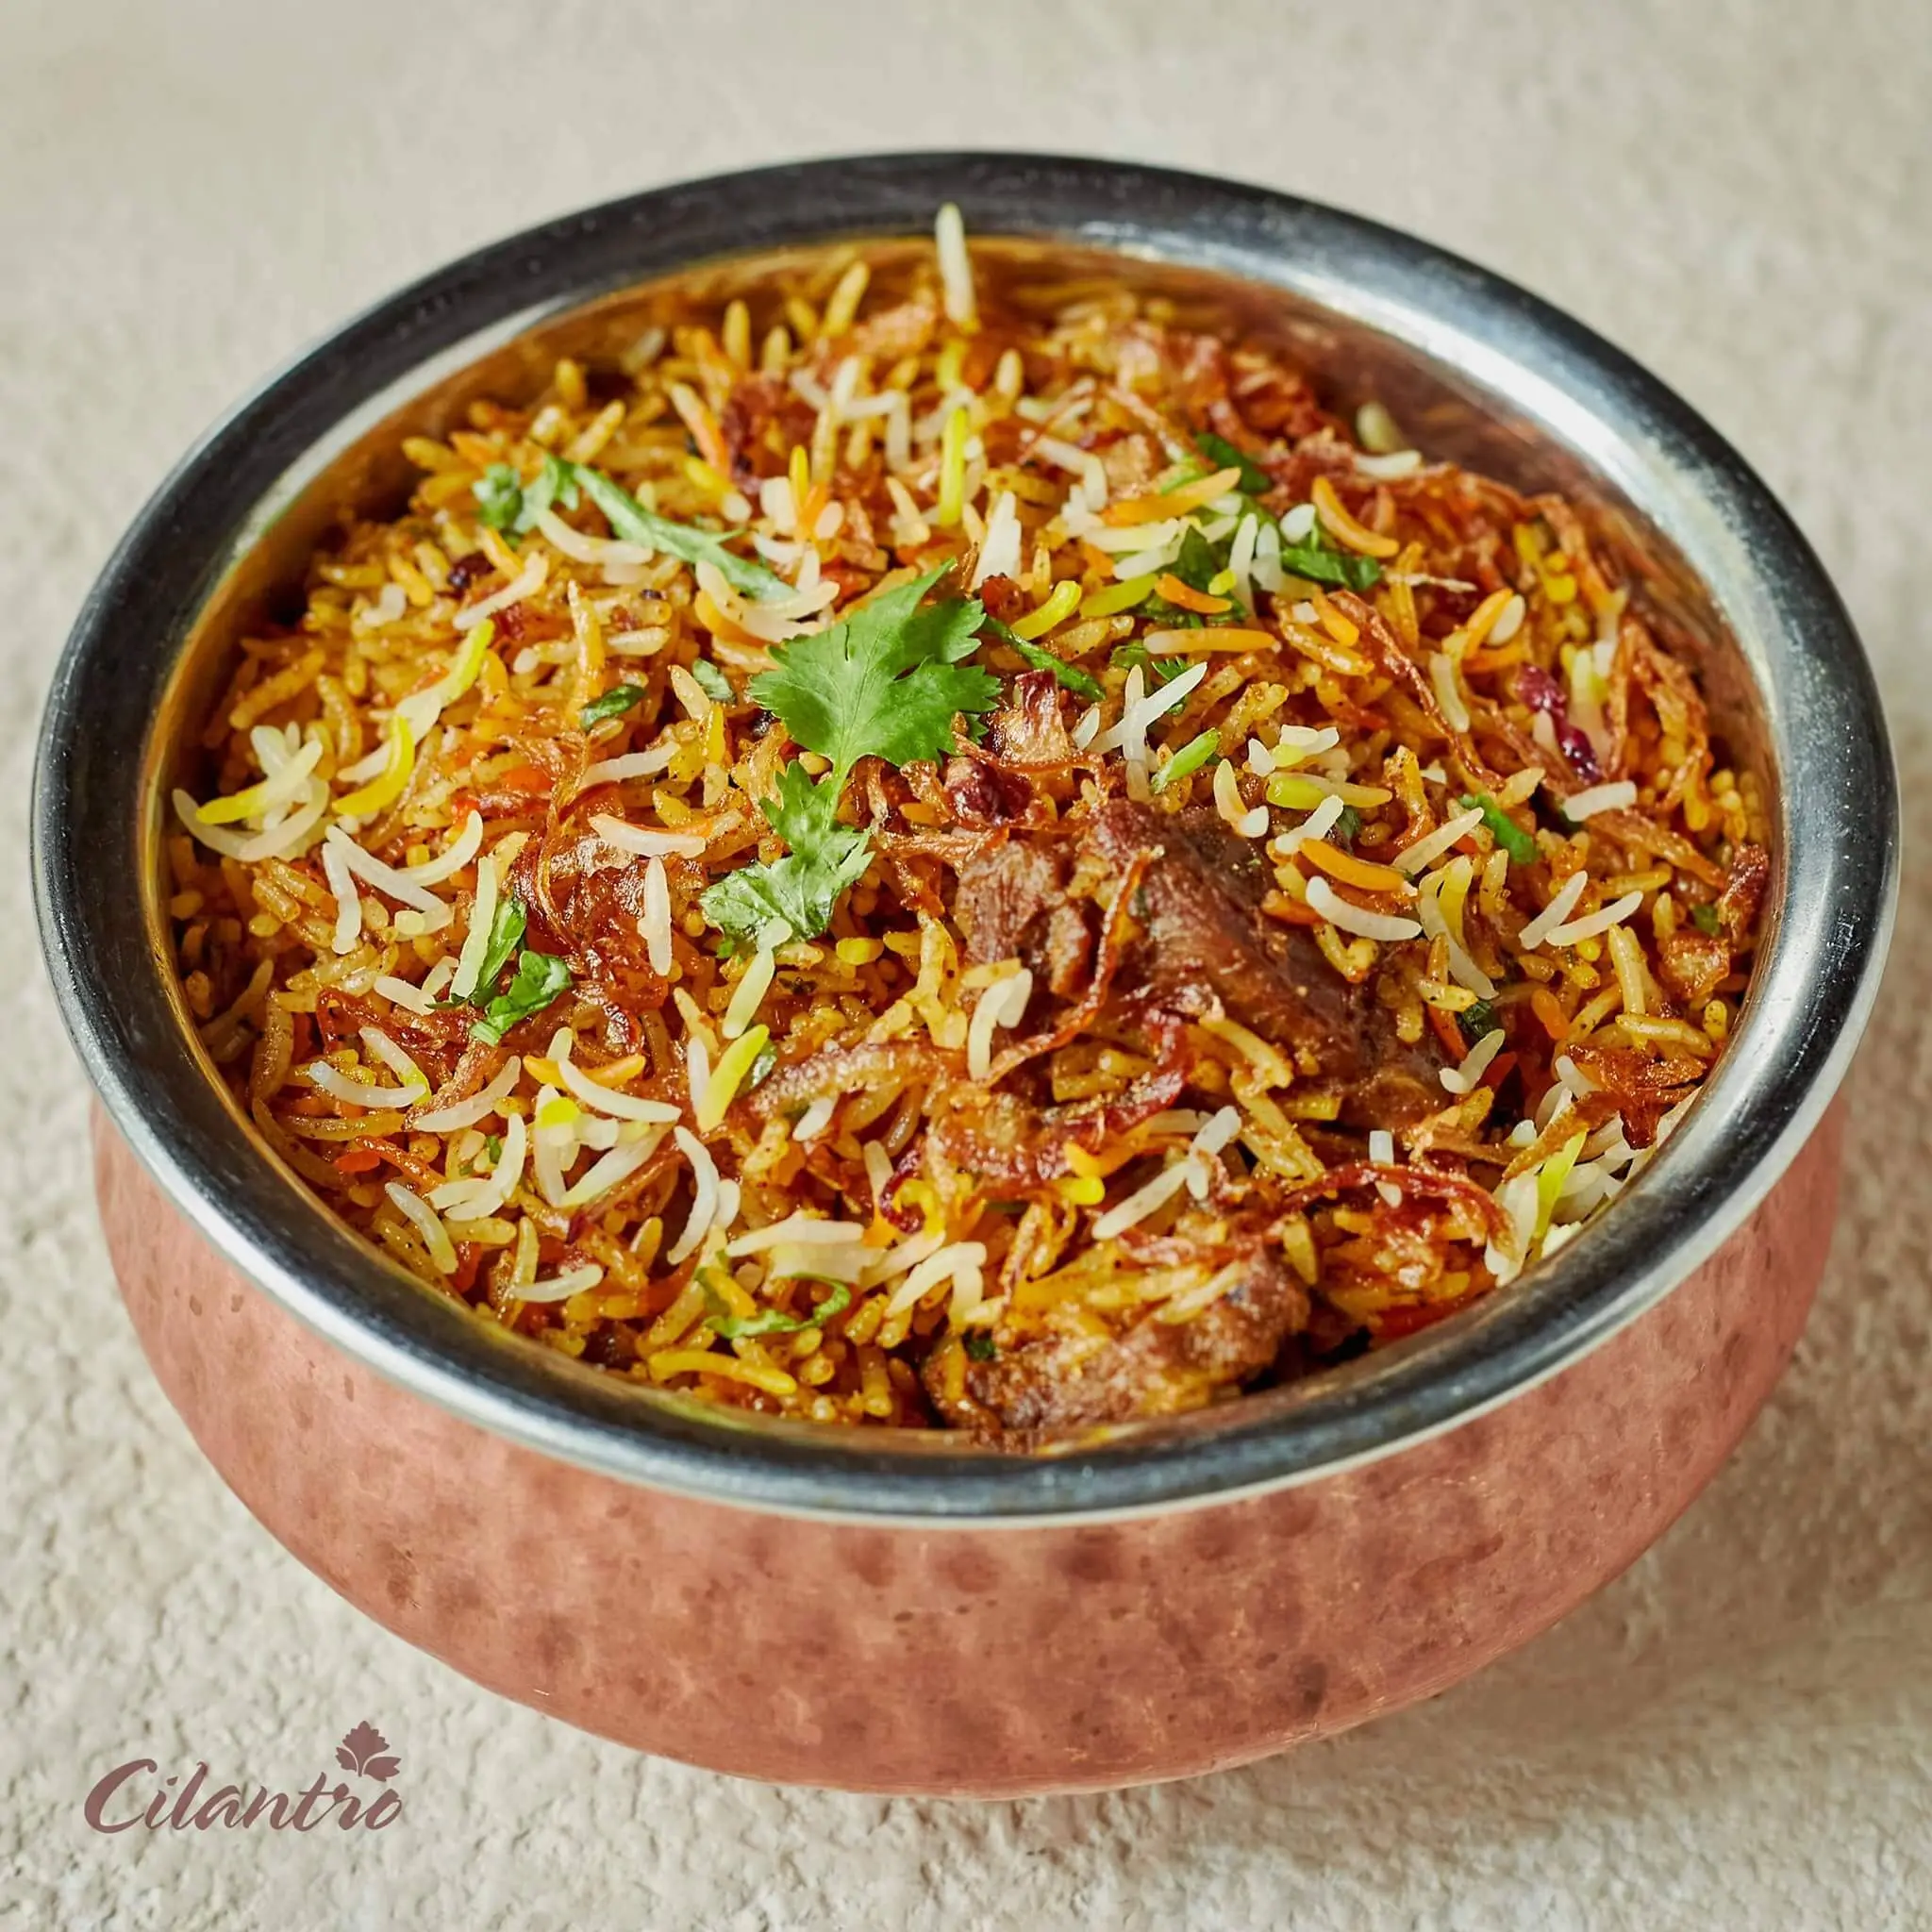 Authentic Indian Flavoured Chicken Dum Biryani - Every bite tells the story of Indian spices taste 